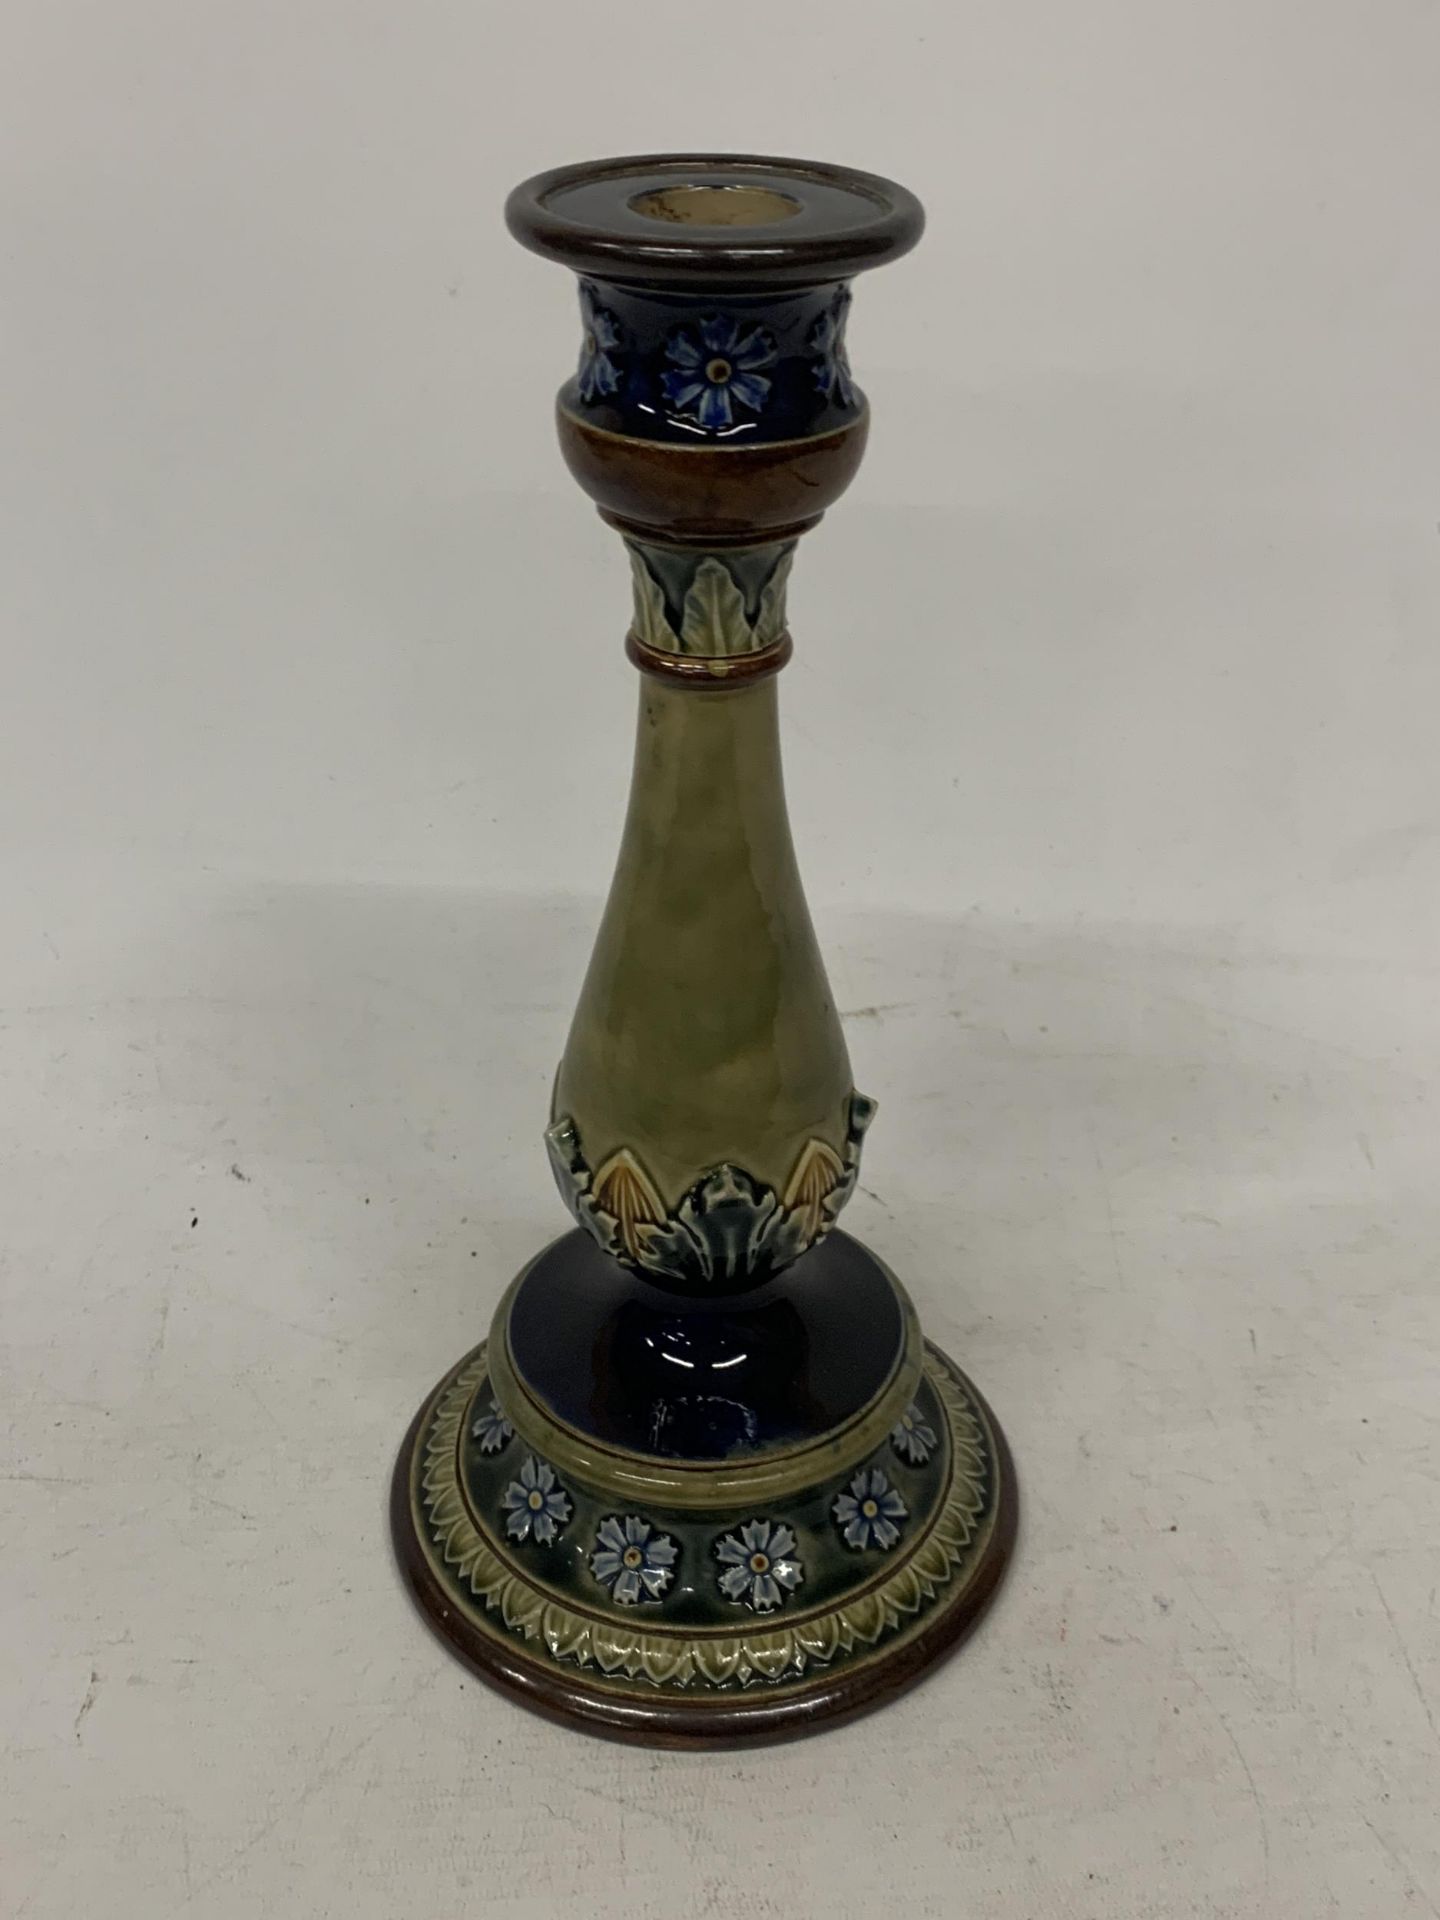 A LATE 19TH/EARLY 20TH CENTURY DOULTON LAMBETH STONEWARE CANDLESTICK